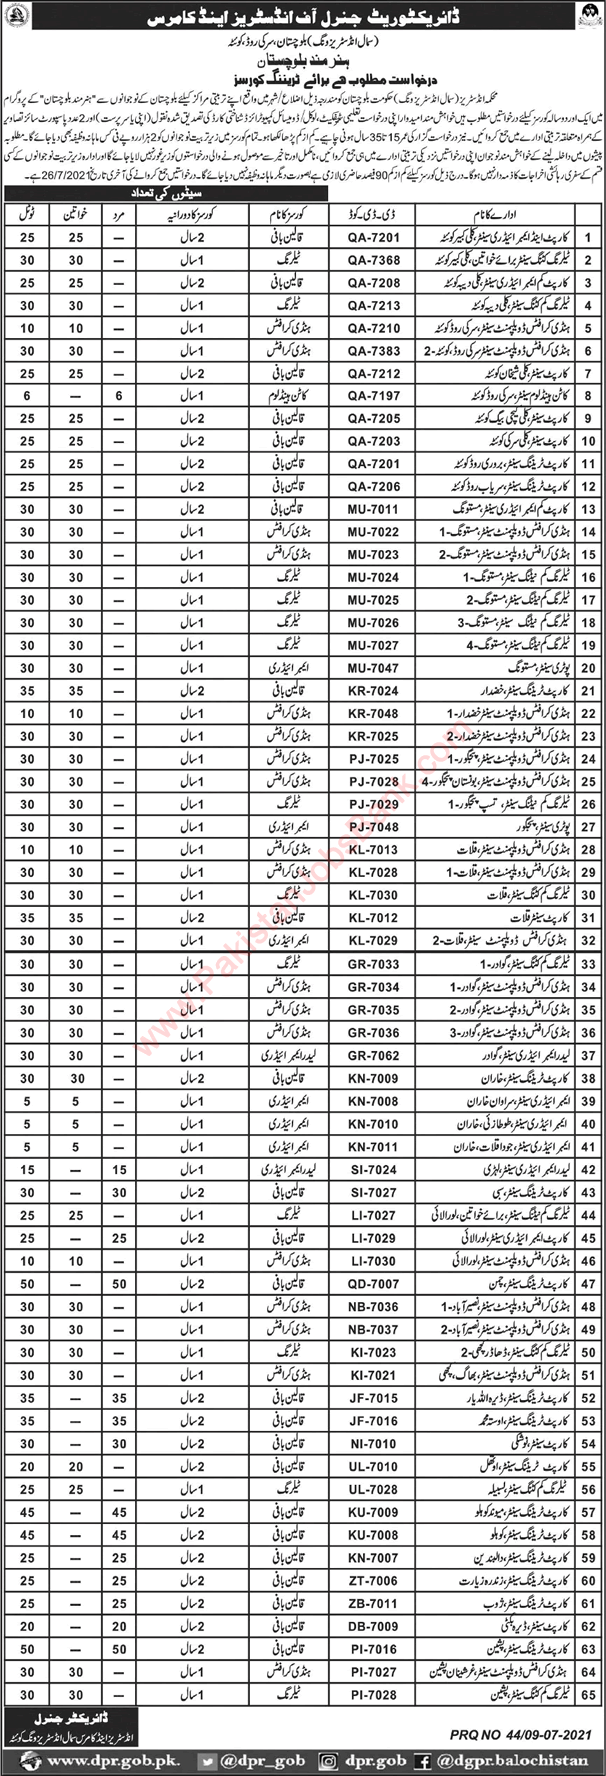 Directorate General of Industries and Commerce Balochistan Free Courses 2021 July Latest